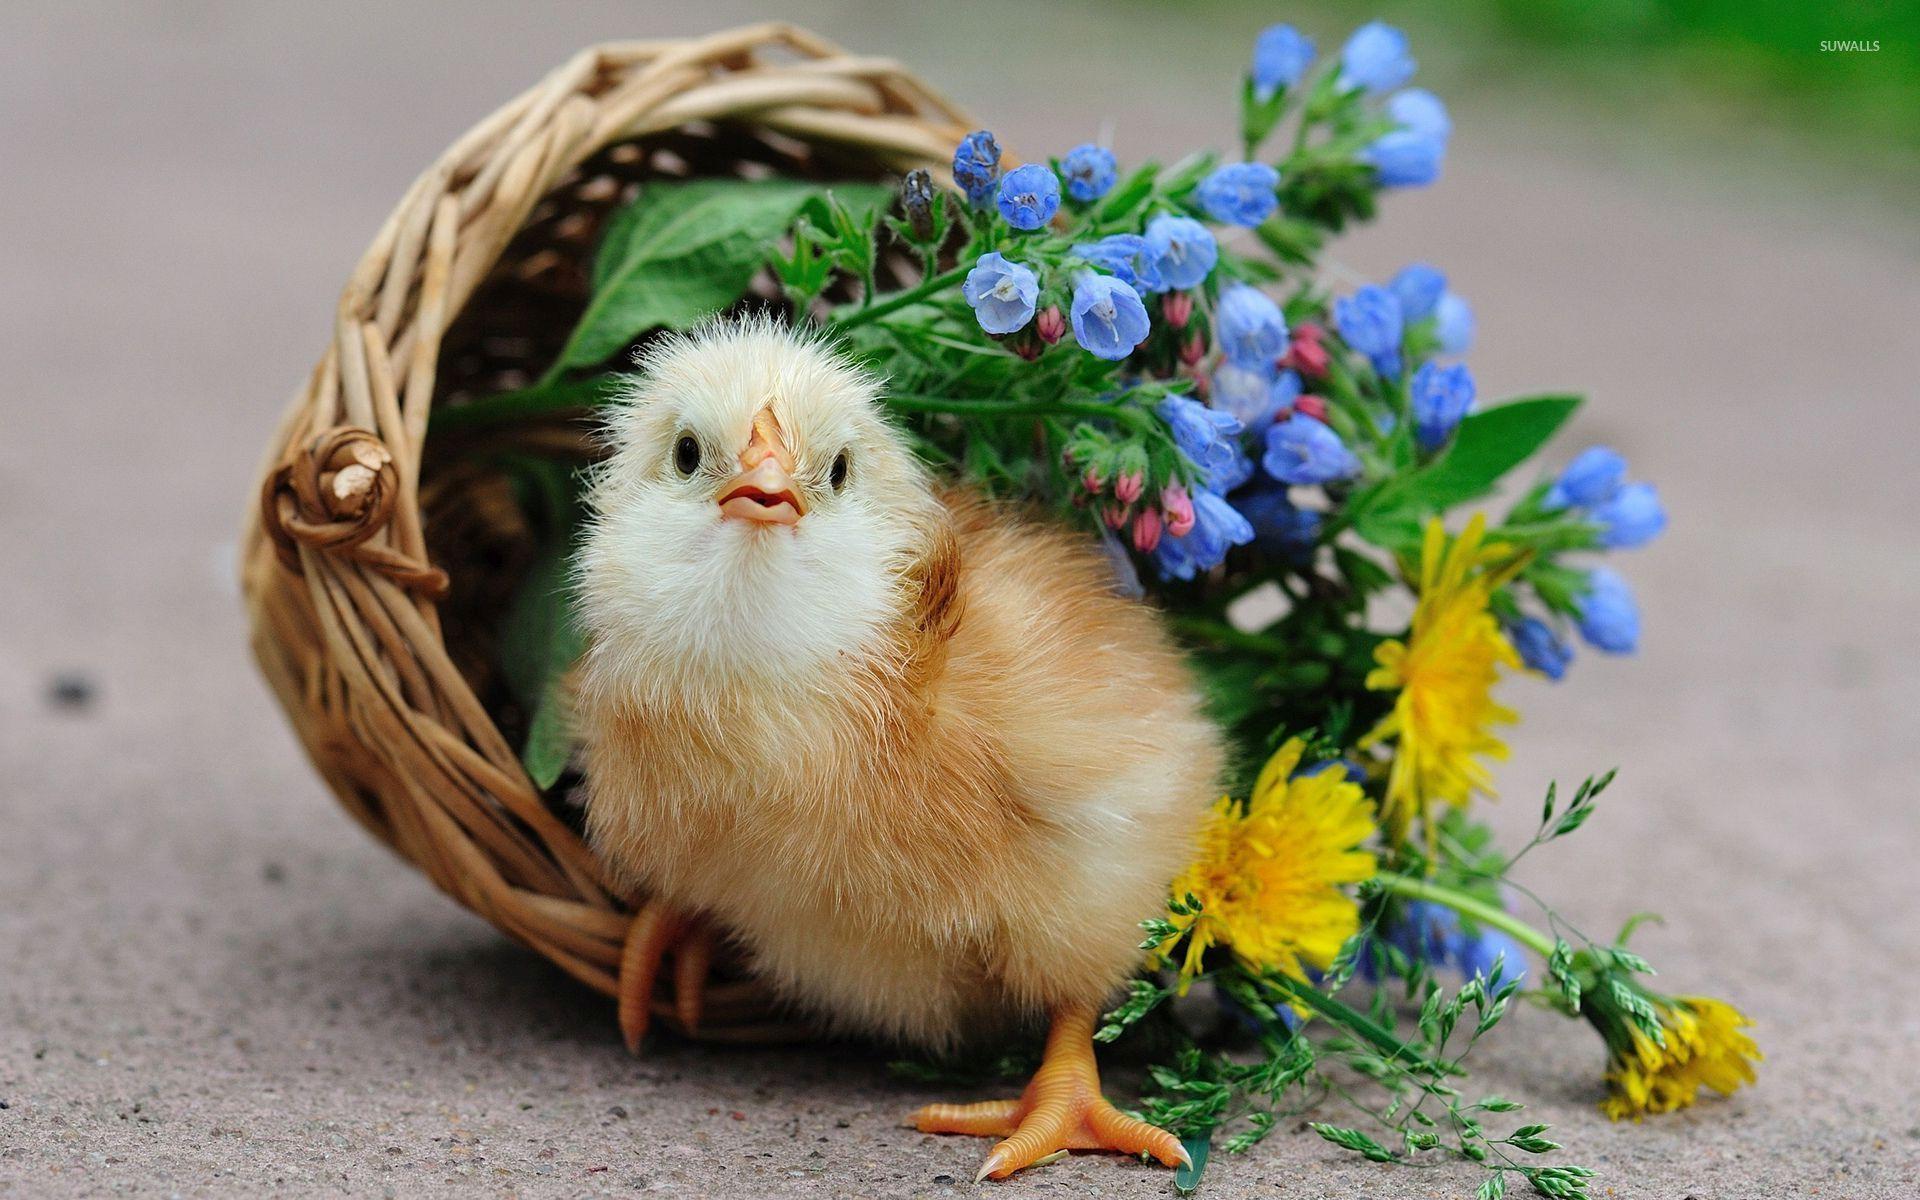 Chick in the basket wallpaper wallpaper